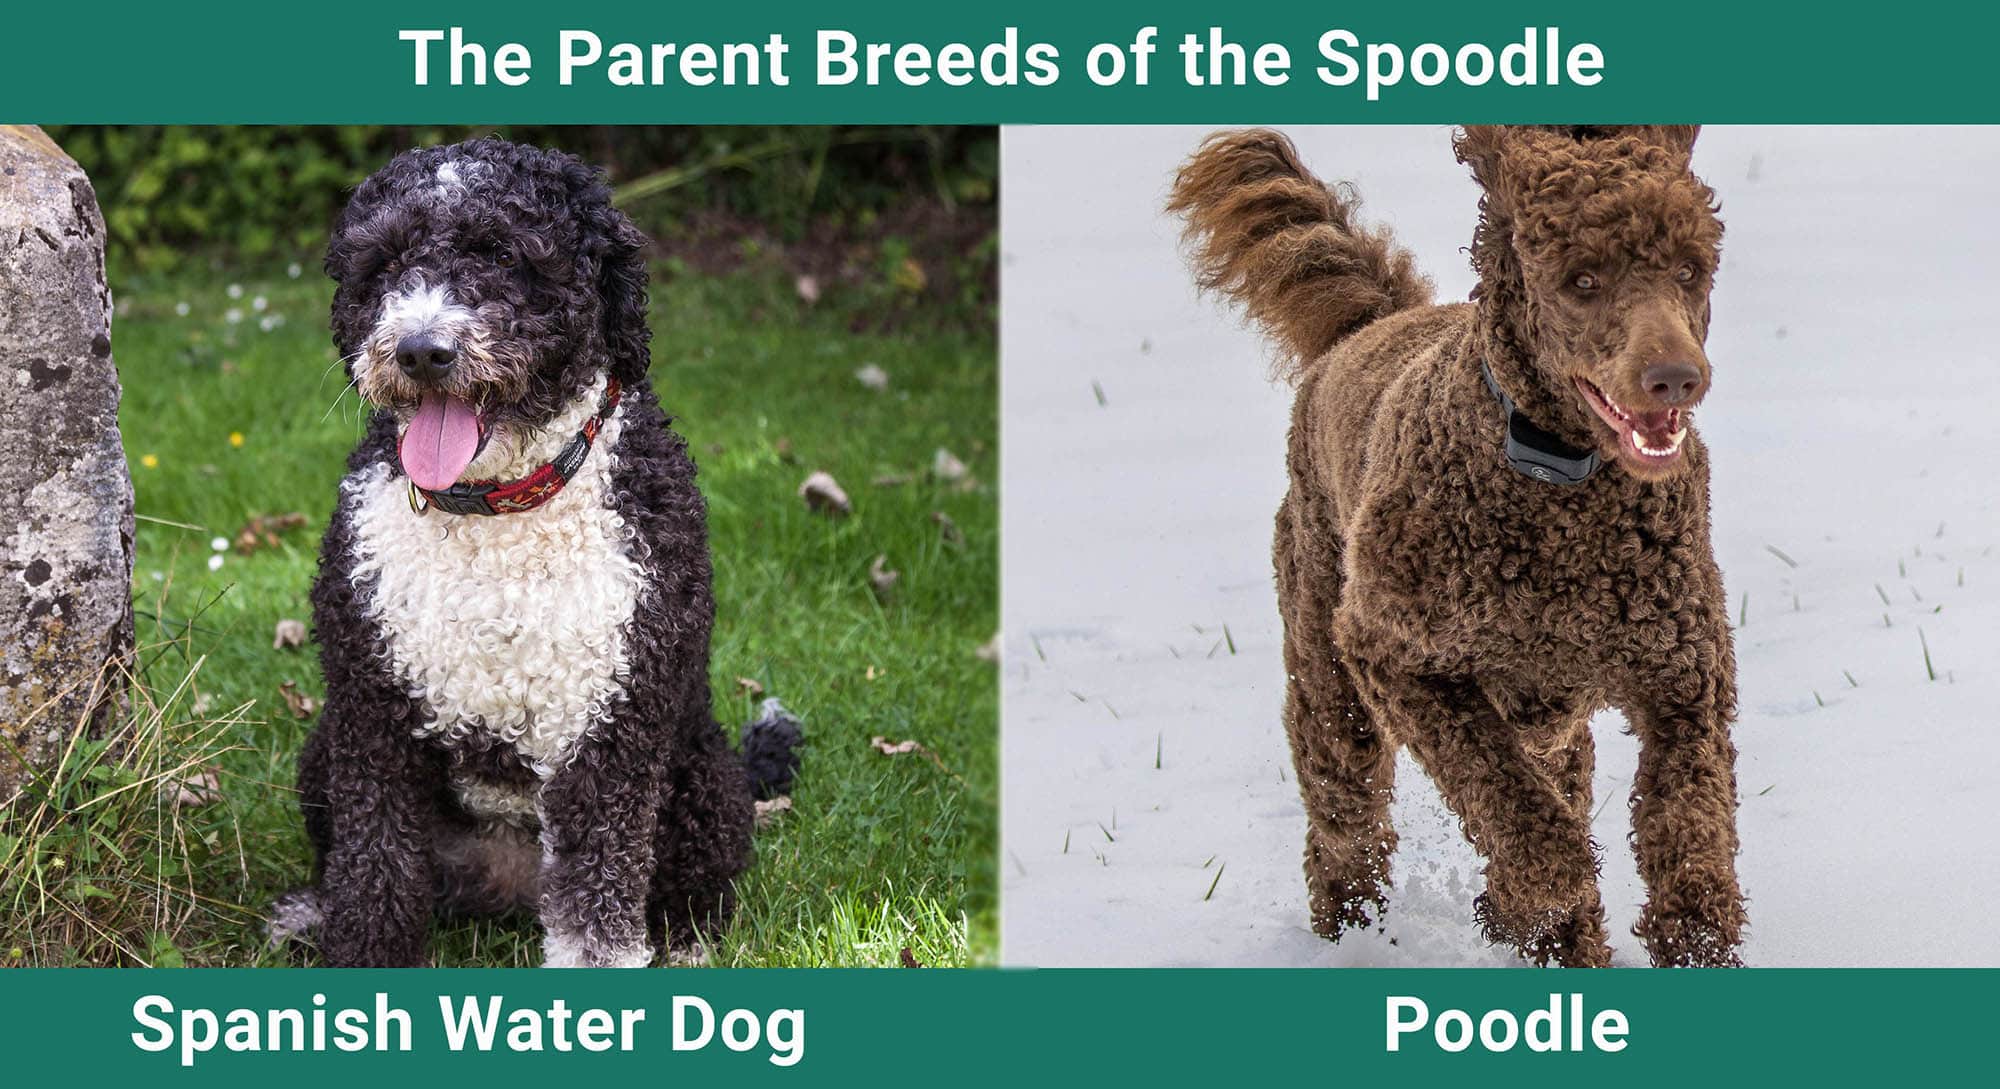 The Parent Breeds of the Spoodle